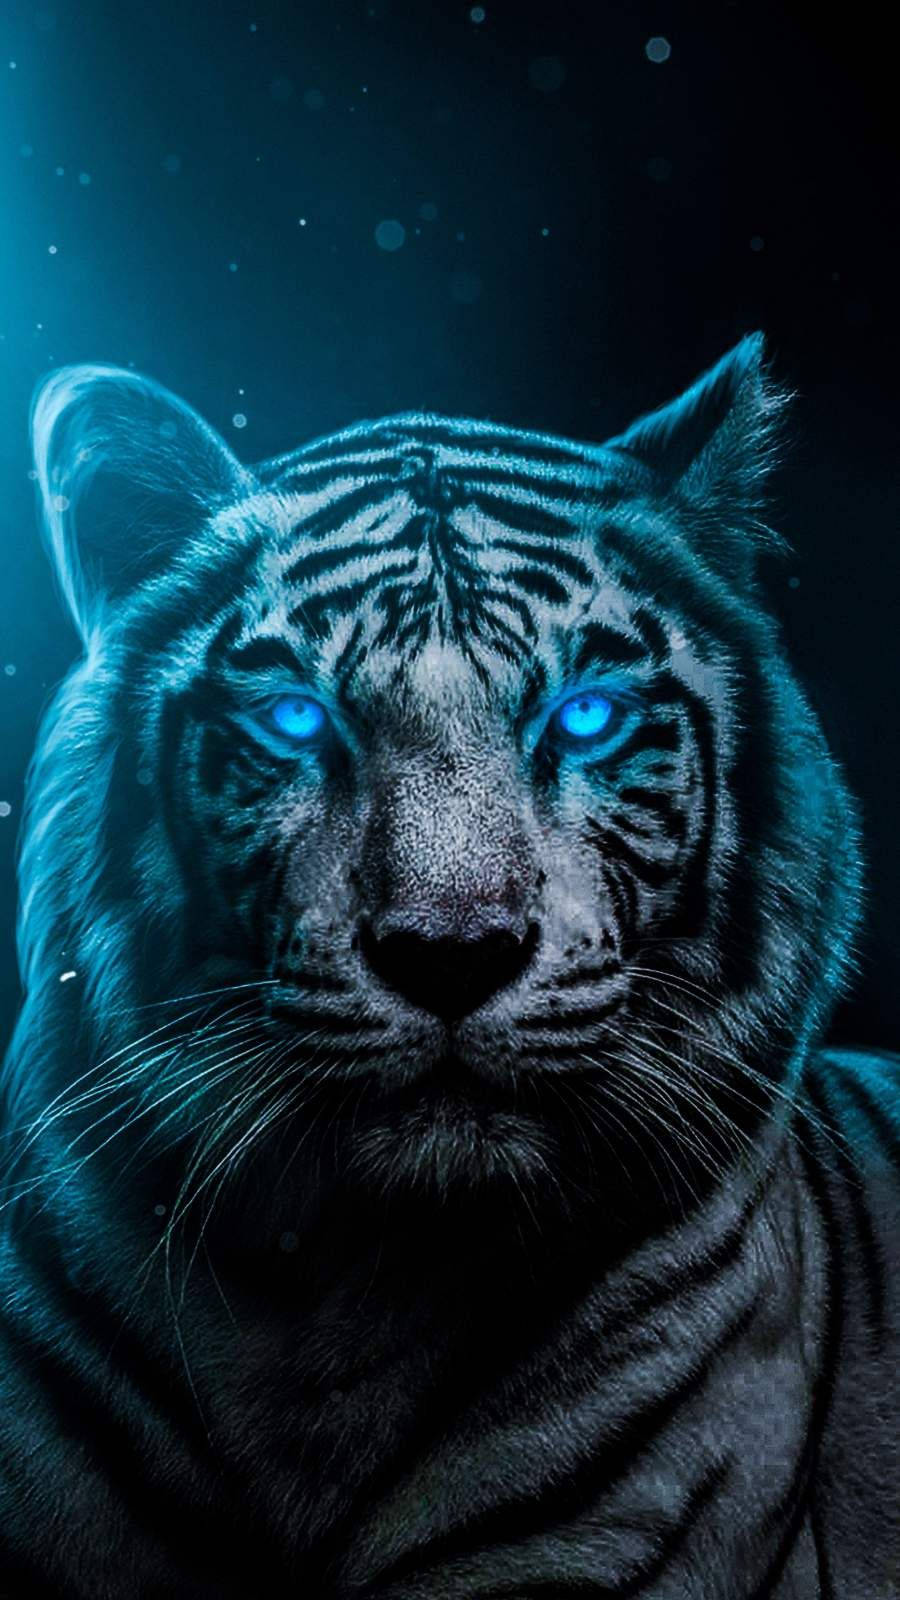 Majestic Blue-eyed Tiger For Iphone Wallpaper Background